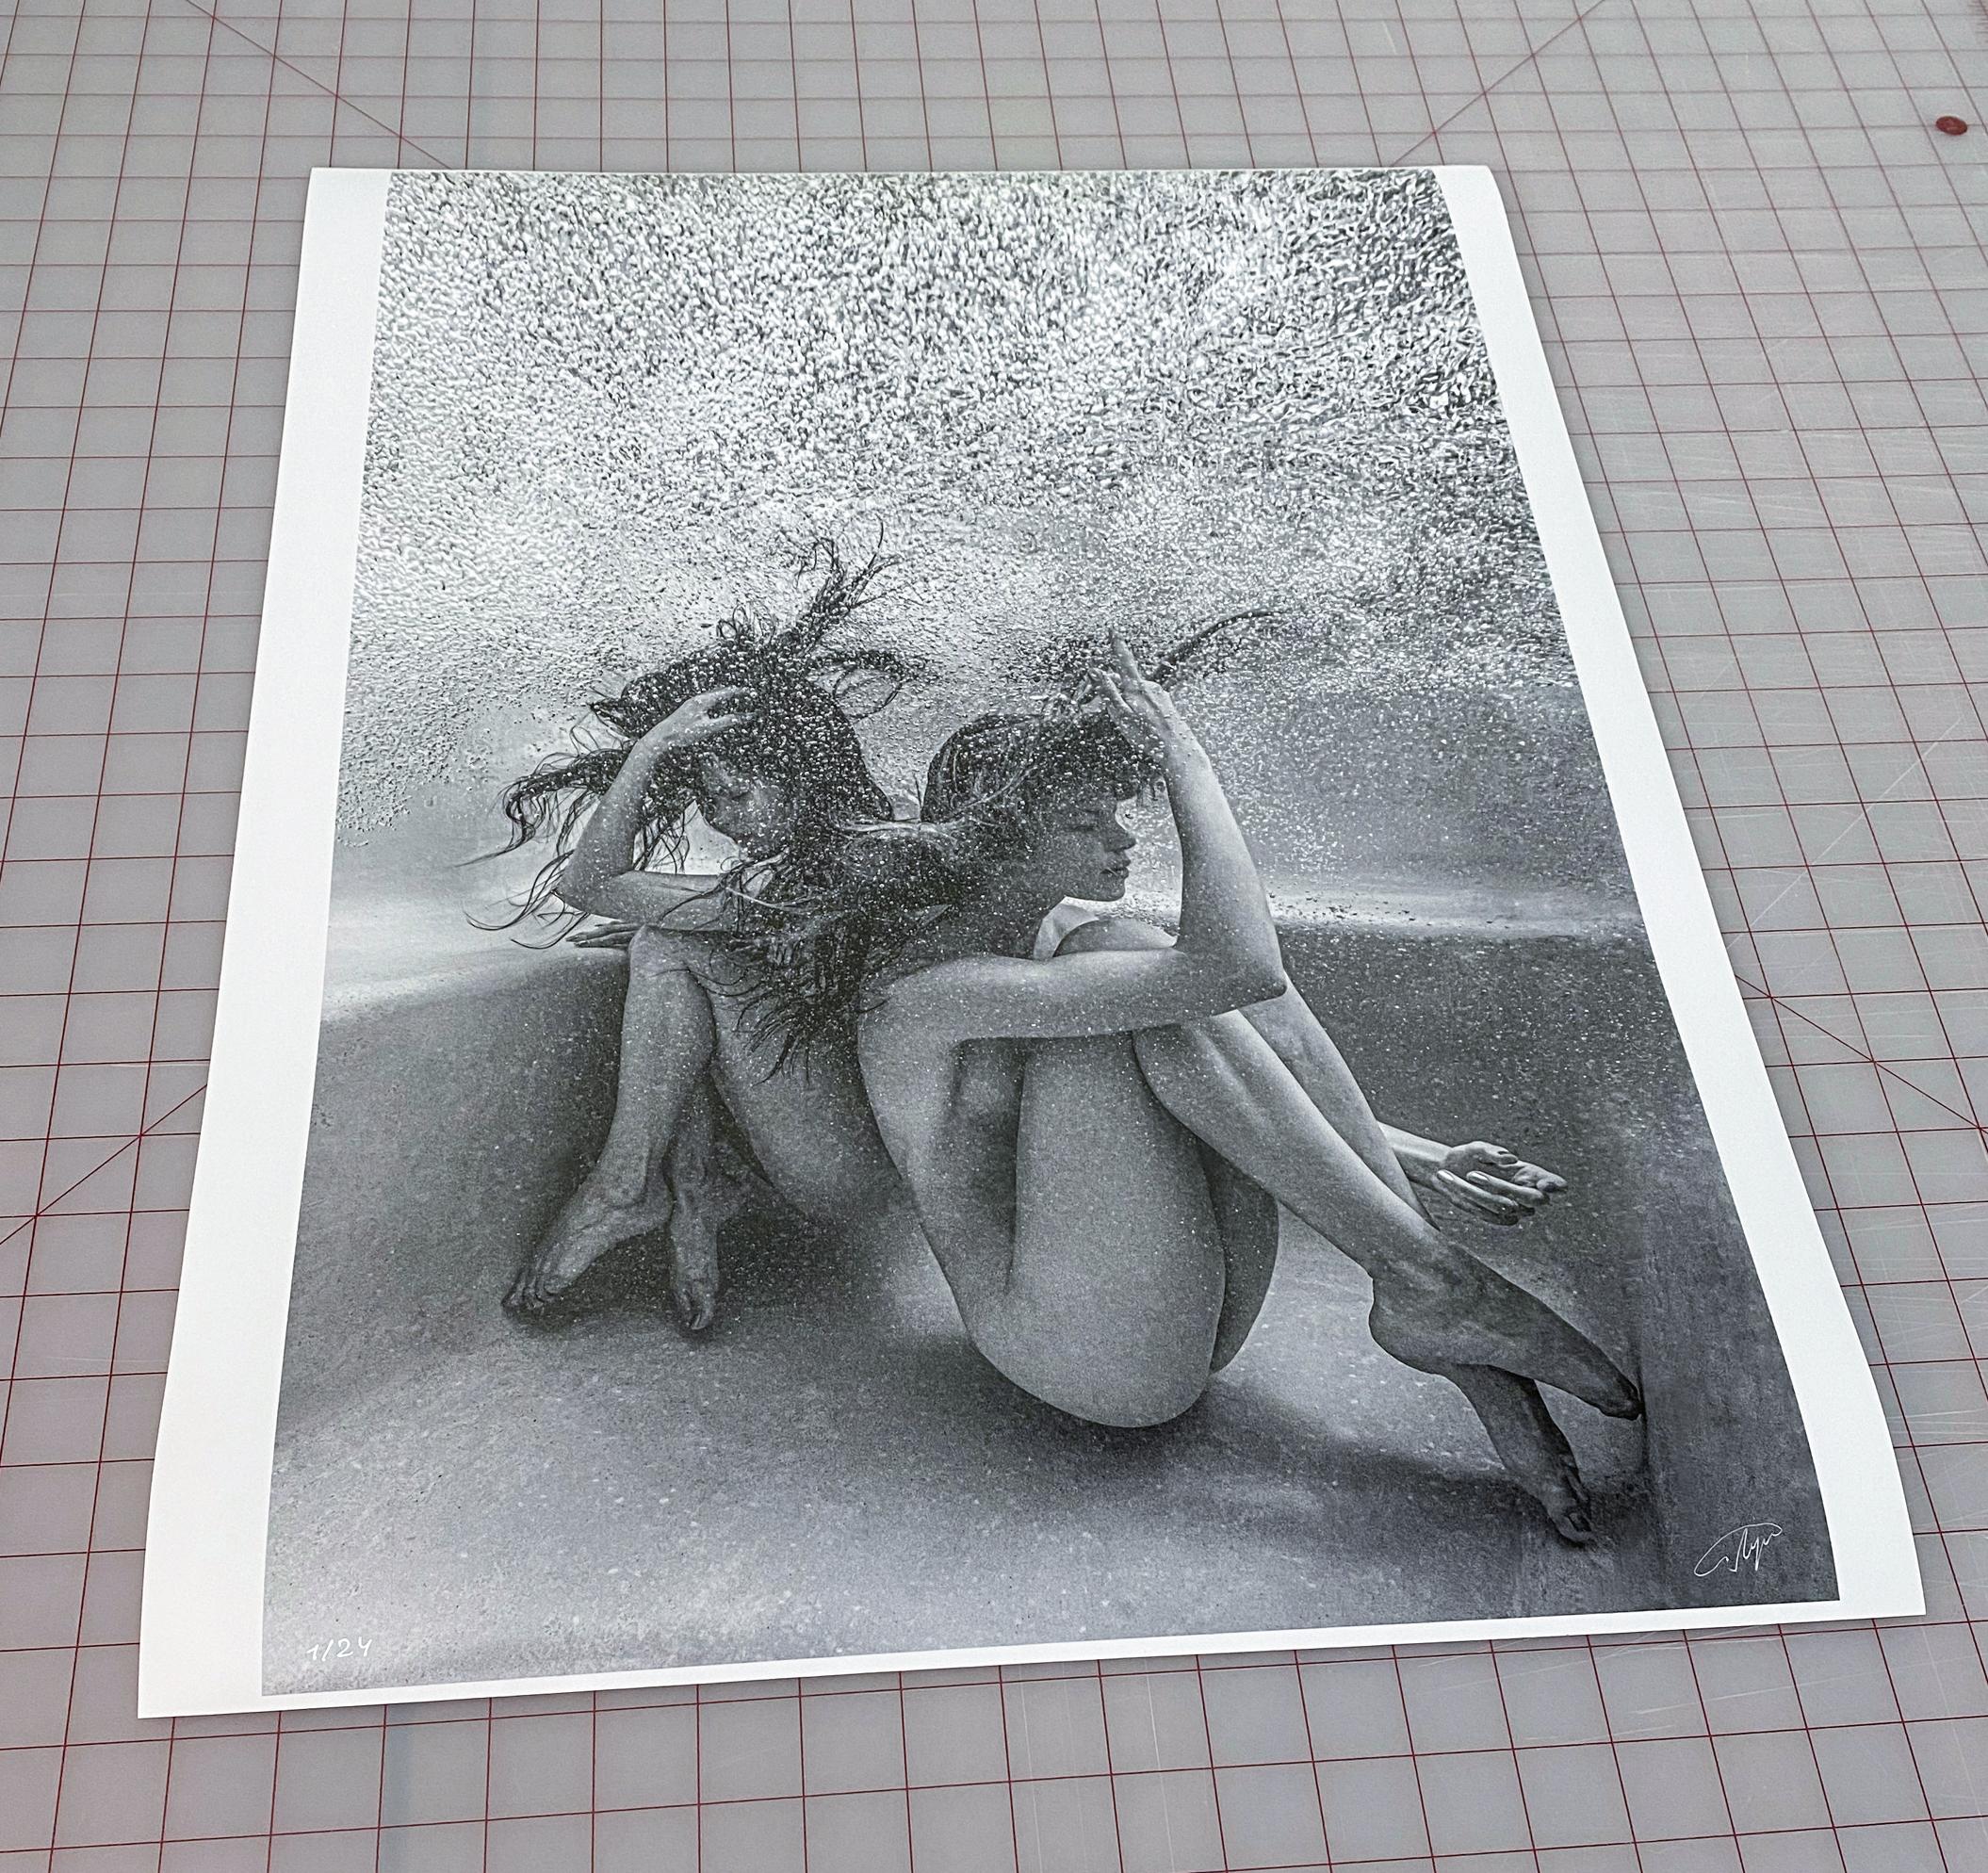 Underwater black & white photograph of two young naked women wrapped in air bubbles.

Original gallery quality archival pigment print signed by the artist.
Limited edition of 24 
Paper size: 53x36